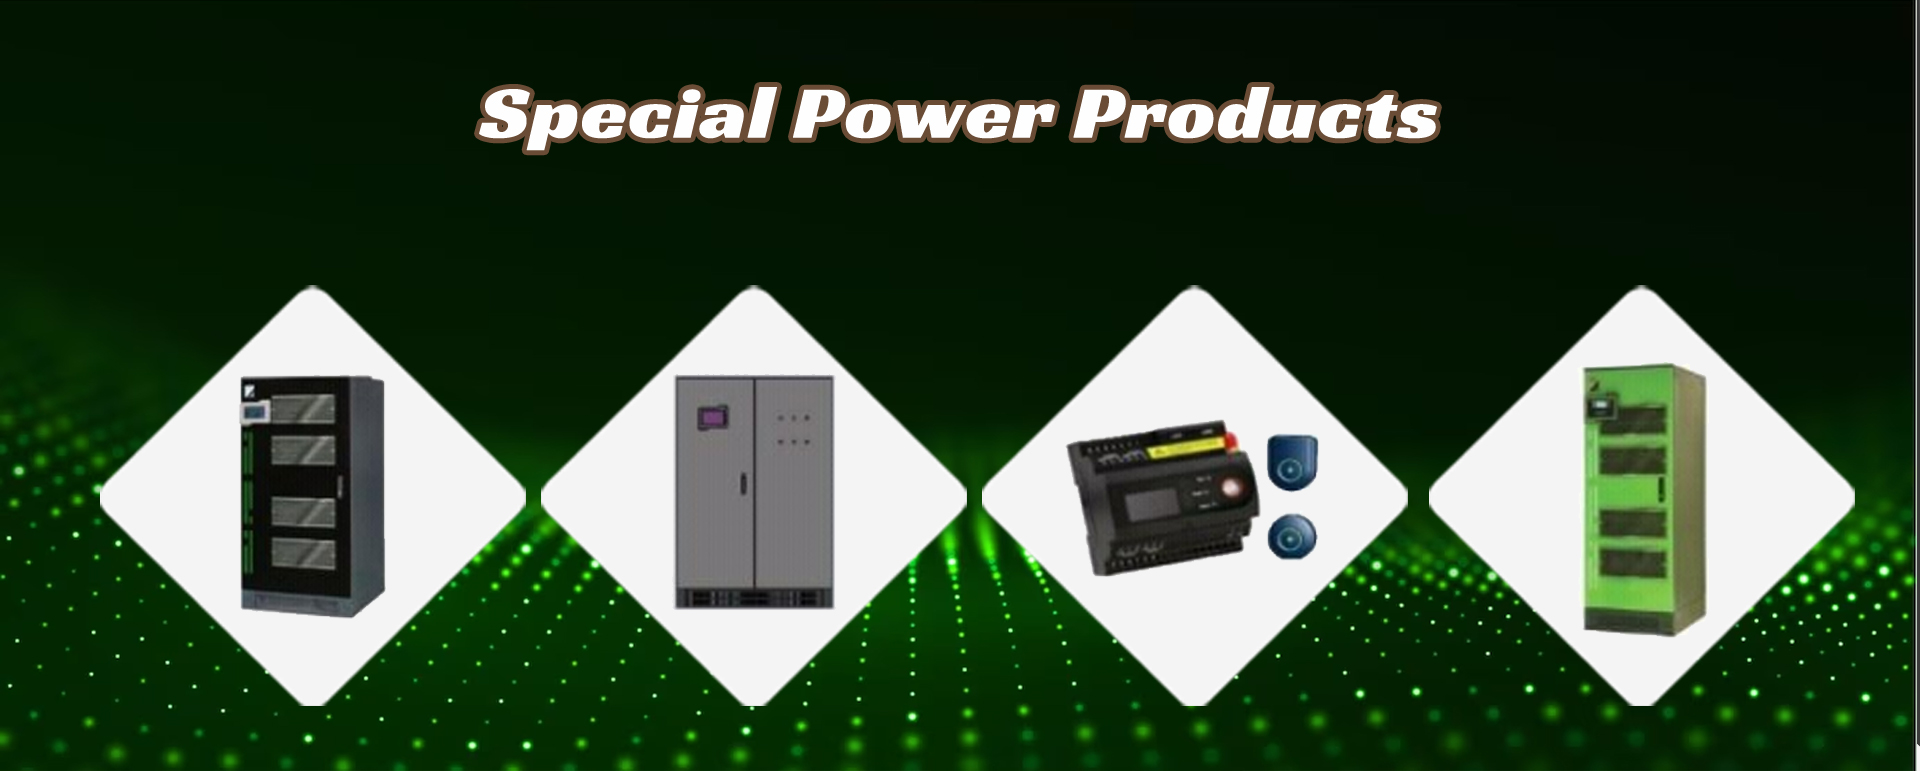 We are Dealers and Distributors and Service Provider of Power Backup, Single Phase Online UPS, 3 Phase online UPS Transformer less Transformer Inbuilt, Modular UPS, Customised UPS, Air Cooled Servo Stabilizer, Oil Cooled Servo Stabilizer, Ultra-K Rated Isolation Transformer, Isolated Power Systems, Power Conditioning, Special Power Products in Pune, Maharashtra, India.